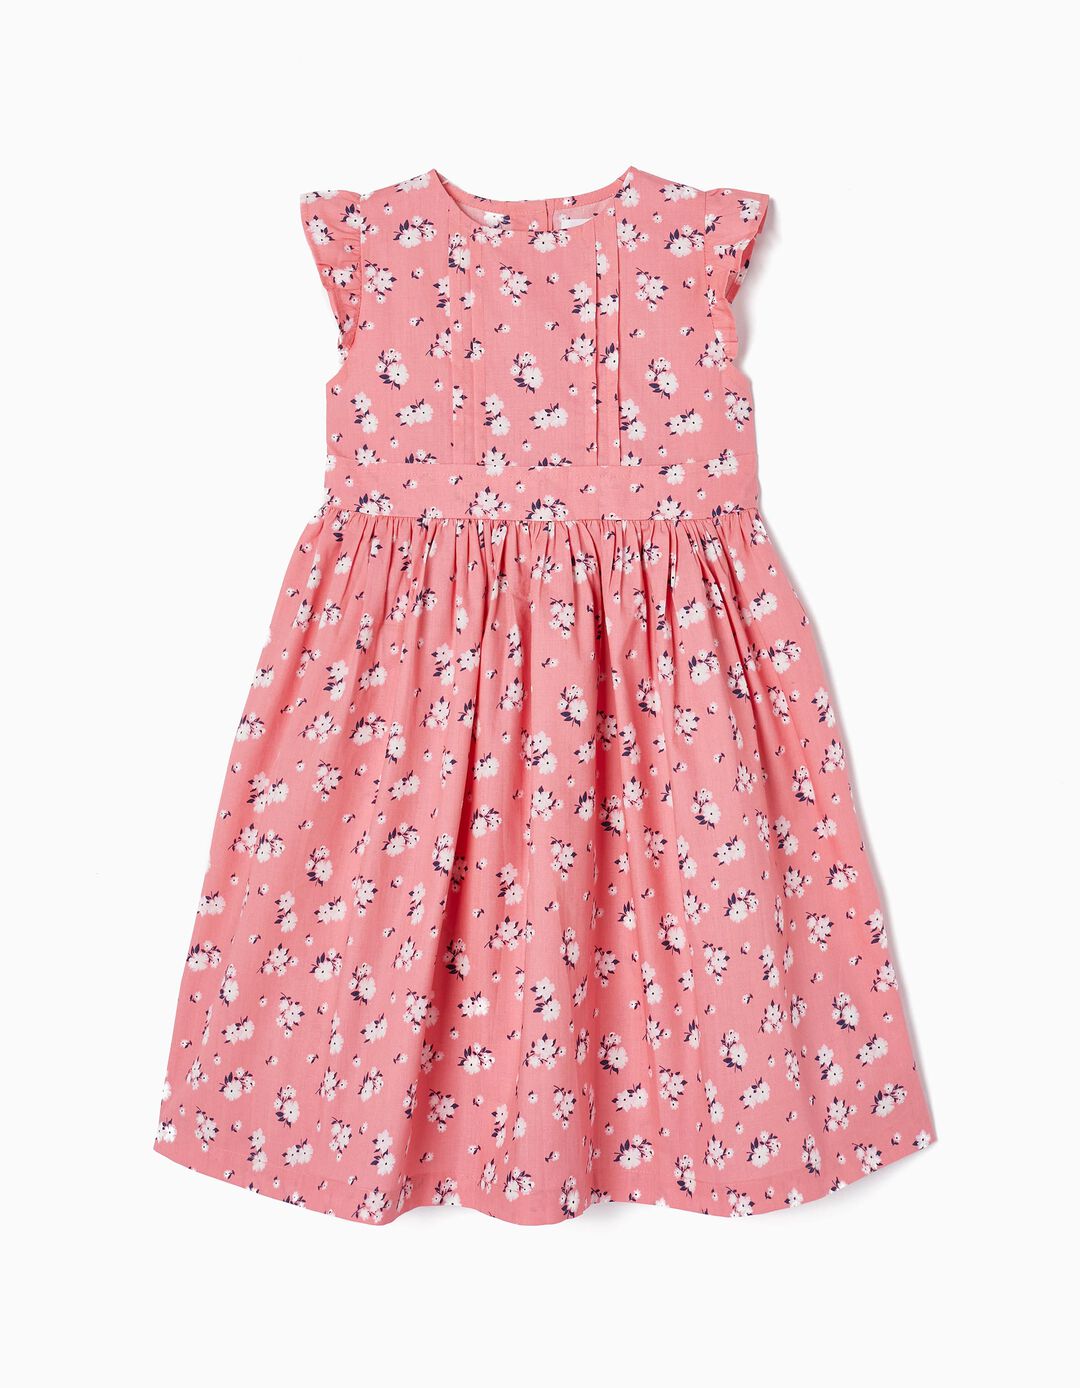 Floral Cotton Dress for Girls, Pink